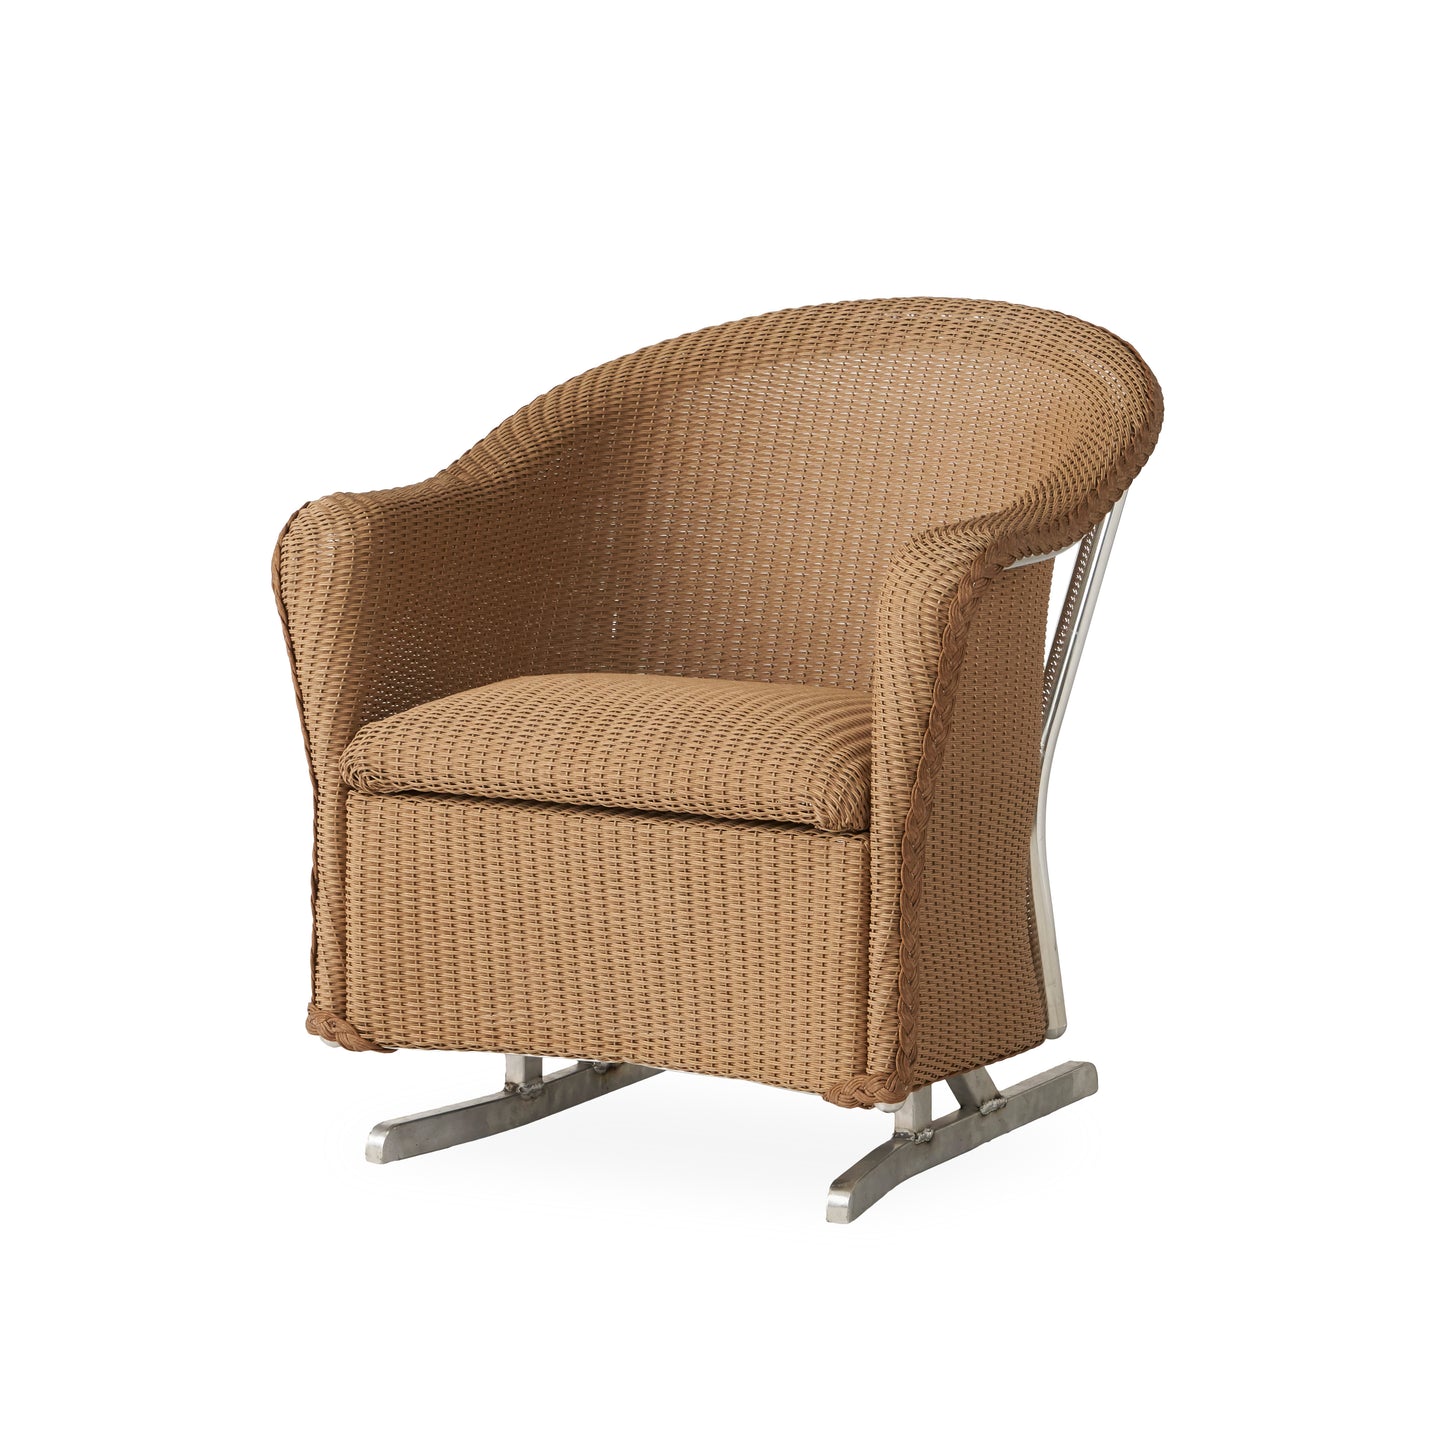 Reflections Spring Rocker with Padded Seat